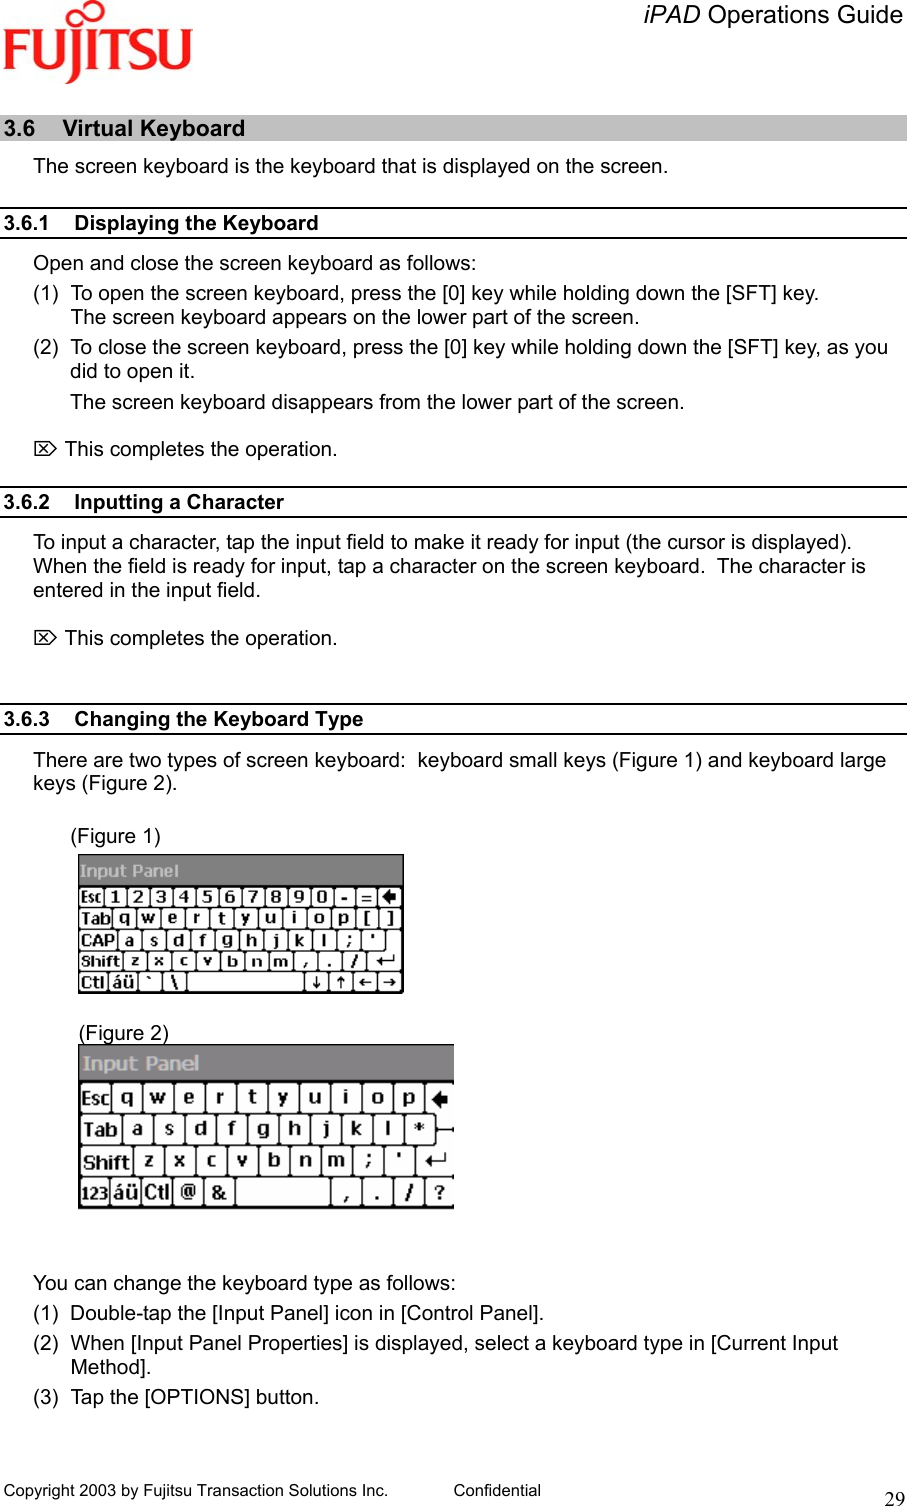   iPAD Operations Guide   Copyright 2003 by Fujitsu Transaction Solutions Inc. Confidential  29 3.6 Virtual Keyboard The screen keyboard is the keyboard that is displayed on the screen.  3.6.1  Displaying the Keyboard Open and close the screen keyboard as follows: (1)  To open the screen keyboard, press the [0] key while holding down the [SFT] key. The screen keyboard appears on the lower part of the screen. (2)  To close the screen keyboard, press the [0] key while holding down the [SFT] key, as you did to open it. The screen keyboard disappears from the lower part of the screen.  ⌦ This completes the operation.  3.6.2 Inputting a Character To input a character, tap the input field to make it ready for input (the cursor is displayed).  When the field is ready for input, tap a character on the screen keyboard.  The character is entered in the input field.  ⌦ This completes the operation.   3.6.3  Changing the Keyboard Type There are two types of screen keyboard:  keyboard small keys (Figure 1) and keyboard large keys (Figure 2).  (Figure 1)             (Figure 2)    You can change the keyboard type as follows: (1)  Double-tap the [Input Panel] icon in [Control Panel]. (2)  When [Input Panel Properties] is displayed, select a keyboard type in [Current Input Method]. (3)  Tap the [OPTIONS] button.  